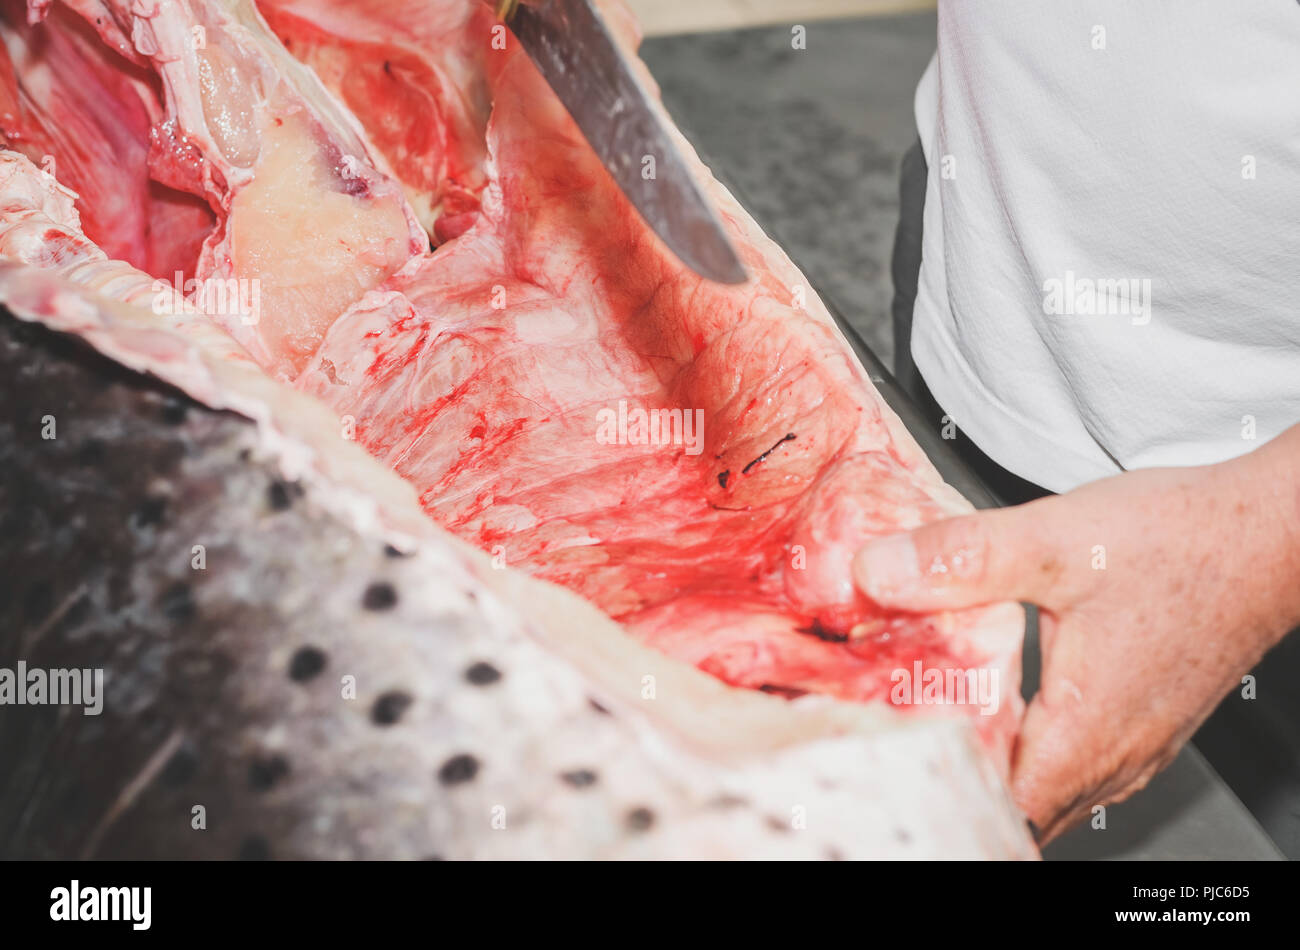 Cleaning the fish and cutting it. Hands of a fishmonger slicing Pintado fish. Pintado fish cutted in half. Brazilian Pintado fish, leather fish with r Stock Photo